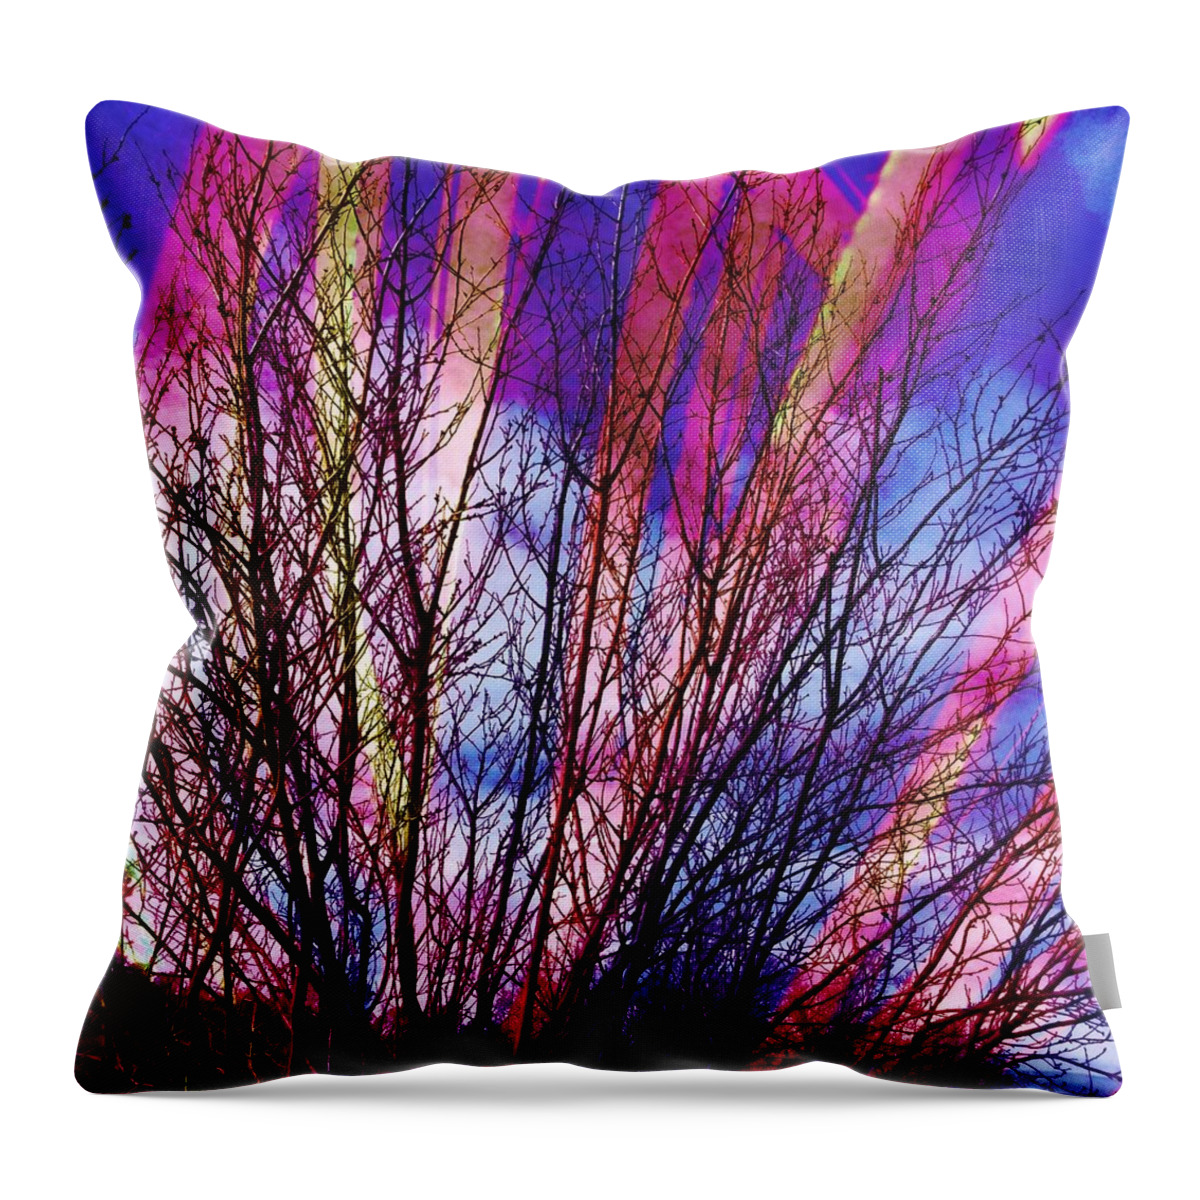 Streamers Throw Pillow featuring the photograph Streamers by Vivian Aumond